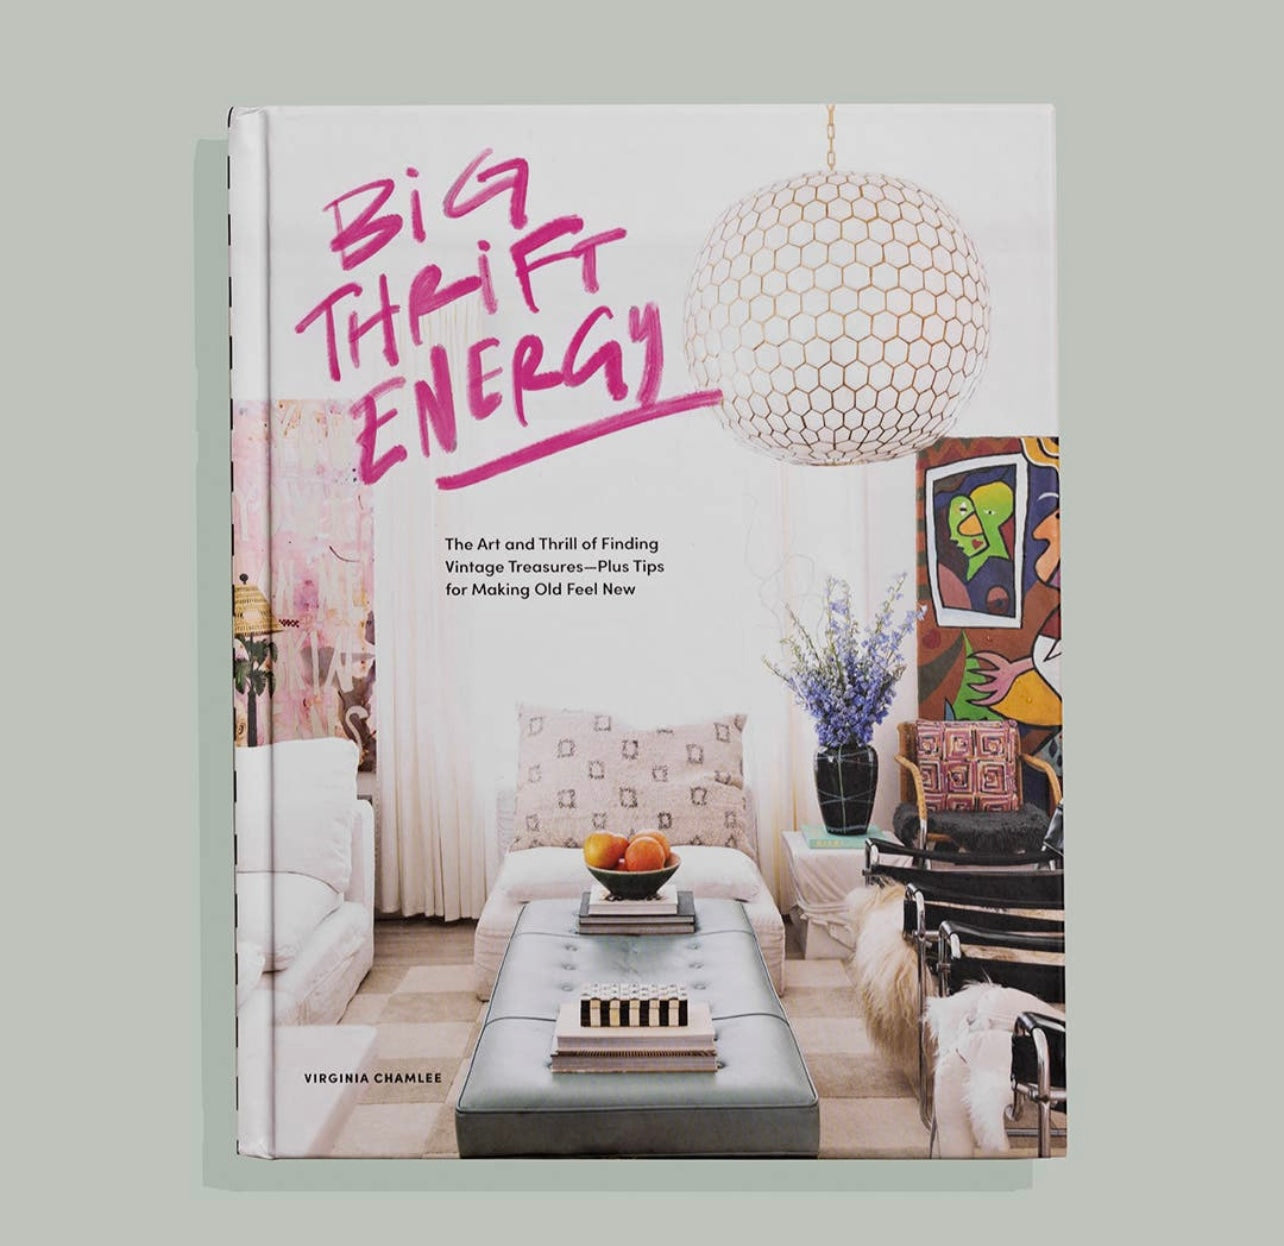 Big Thrift Energy Coffee Table Book